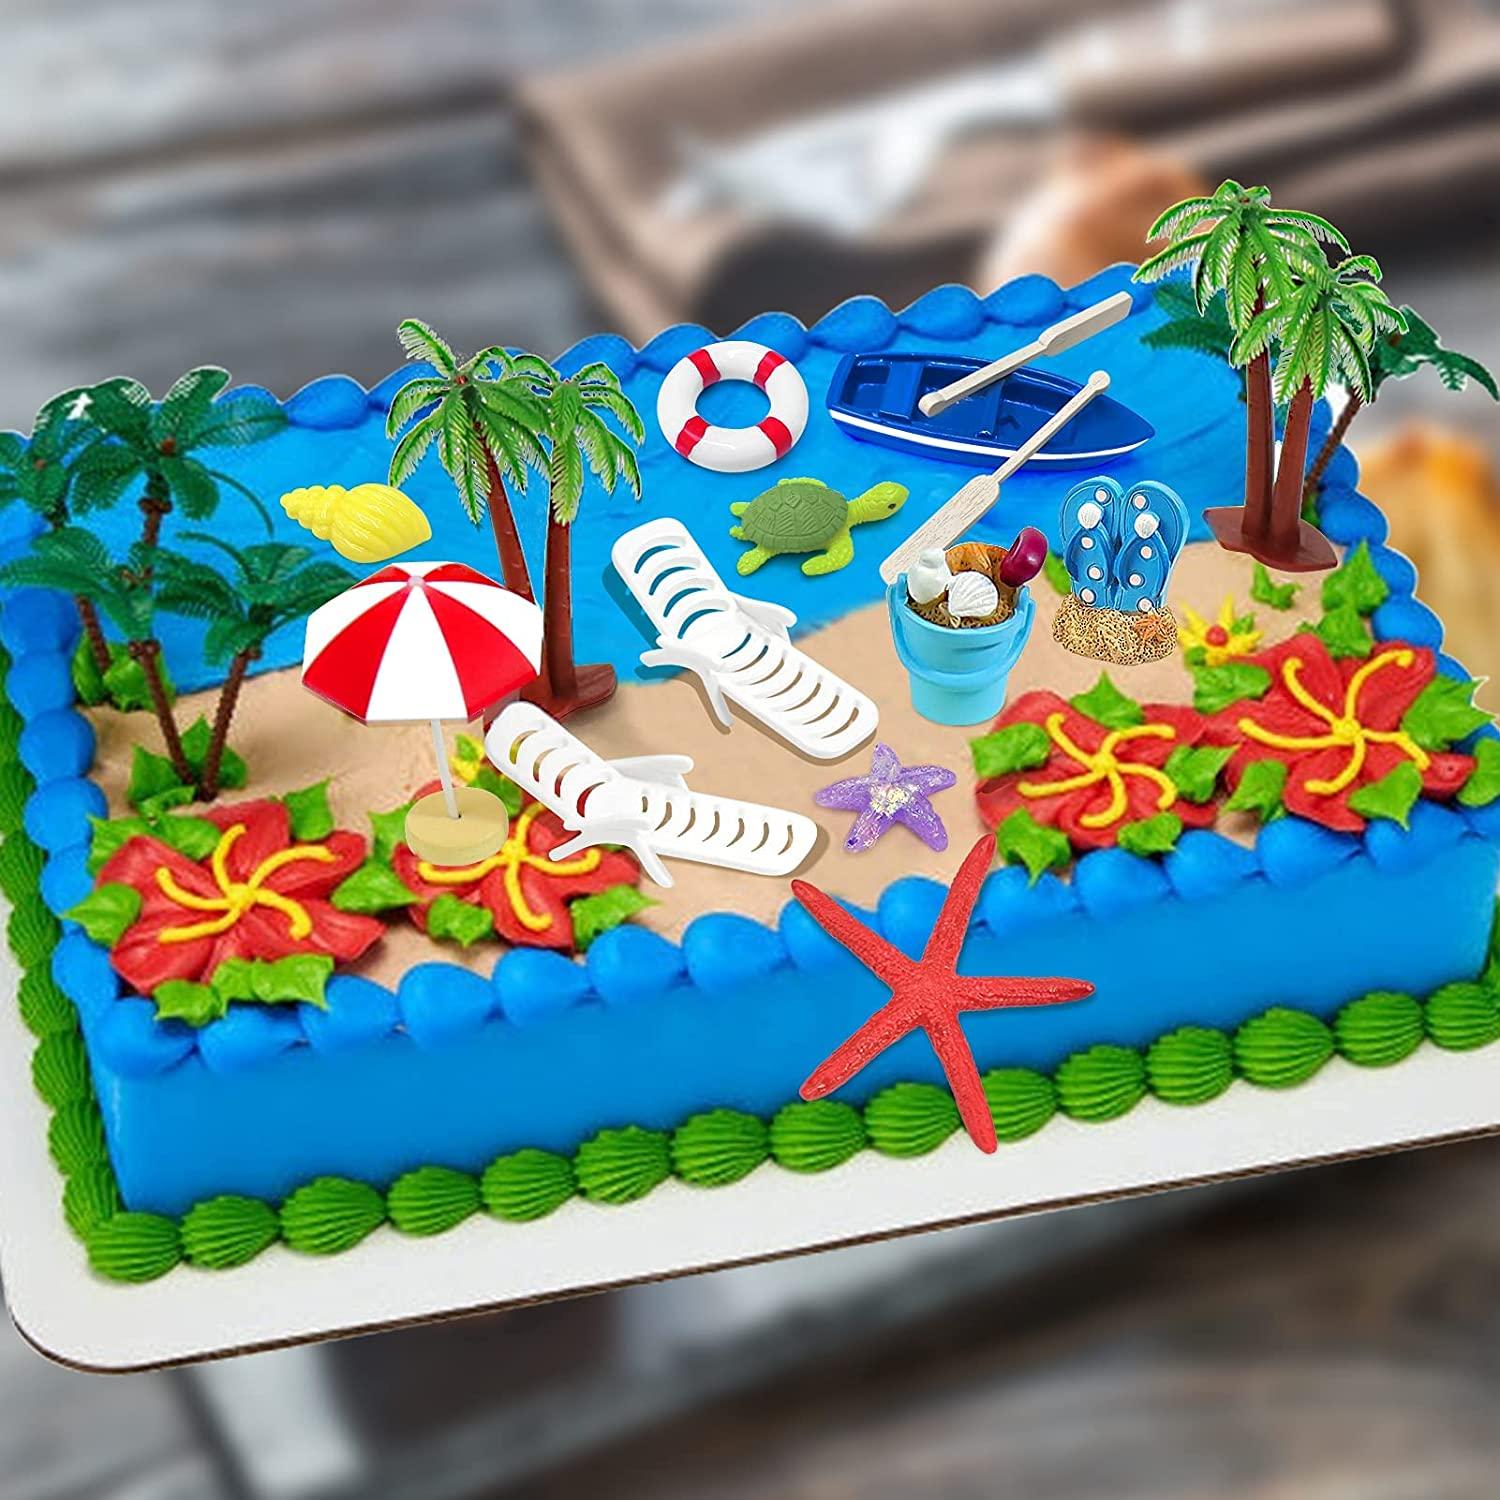 A “Bahamas” themed birthday cake in honor of our summer vacation. : r/Baking